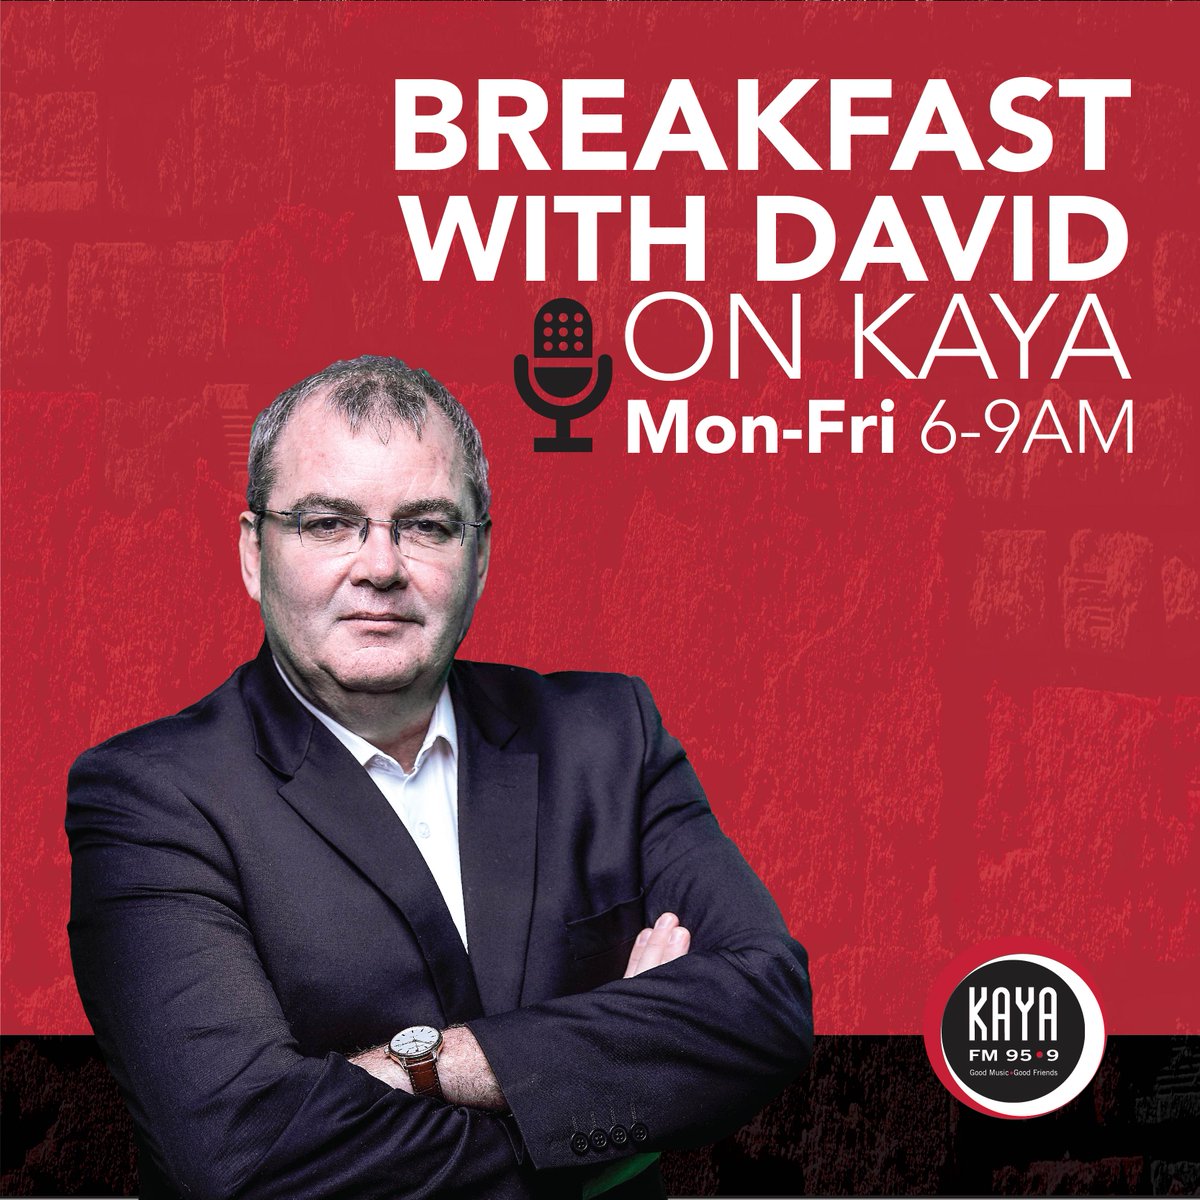 Good Morning and Welcome to #BreakfastwithDavid
We'll start today's show by talking to SABC journalist, Thandeka Gqubule who's accused of being a 'Stratcom' agent #WinnieDocumentary. We'll also have a conversation with documentary maker, Pascale Lamche.
Join us @kayafm95dot9